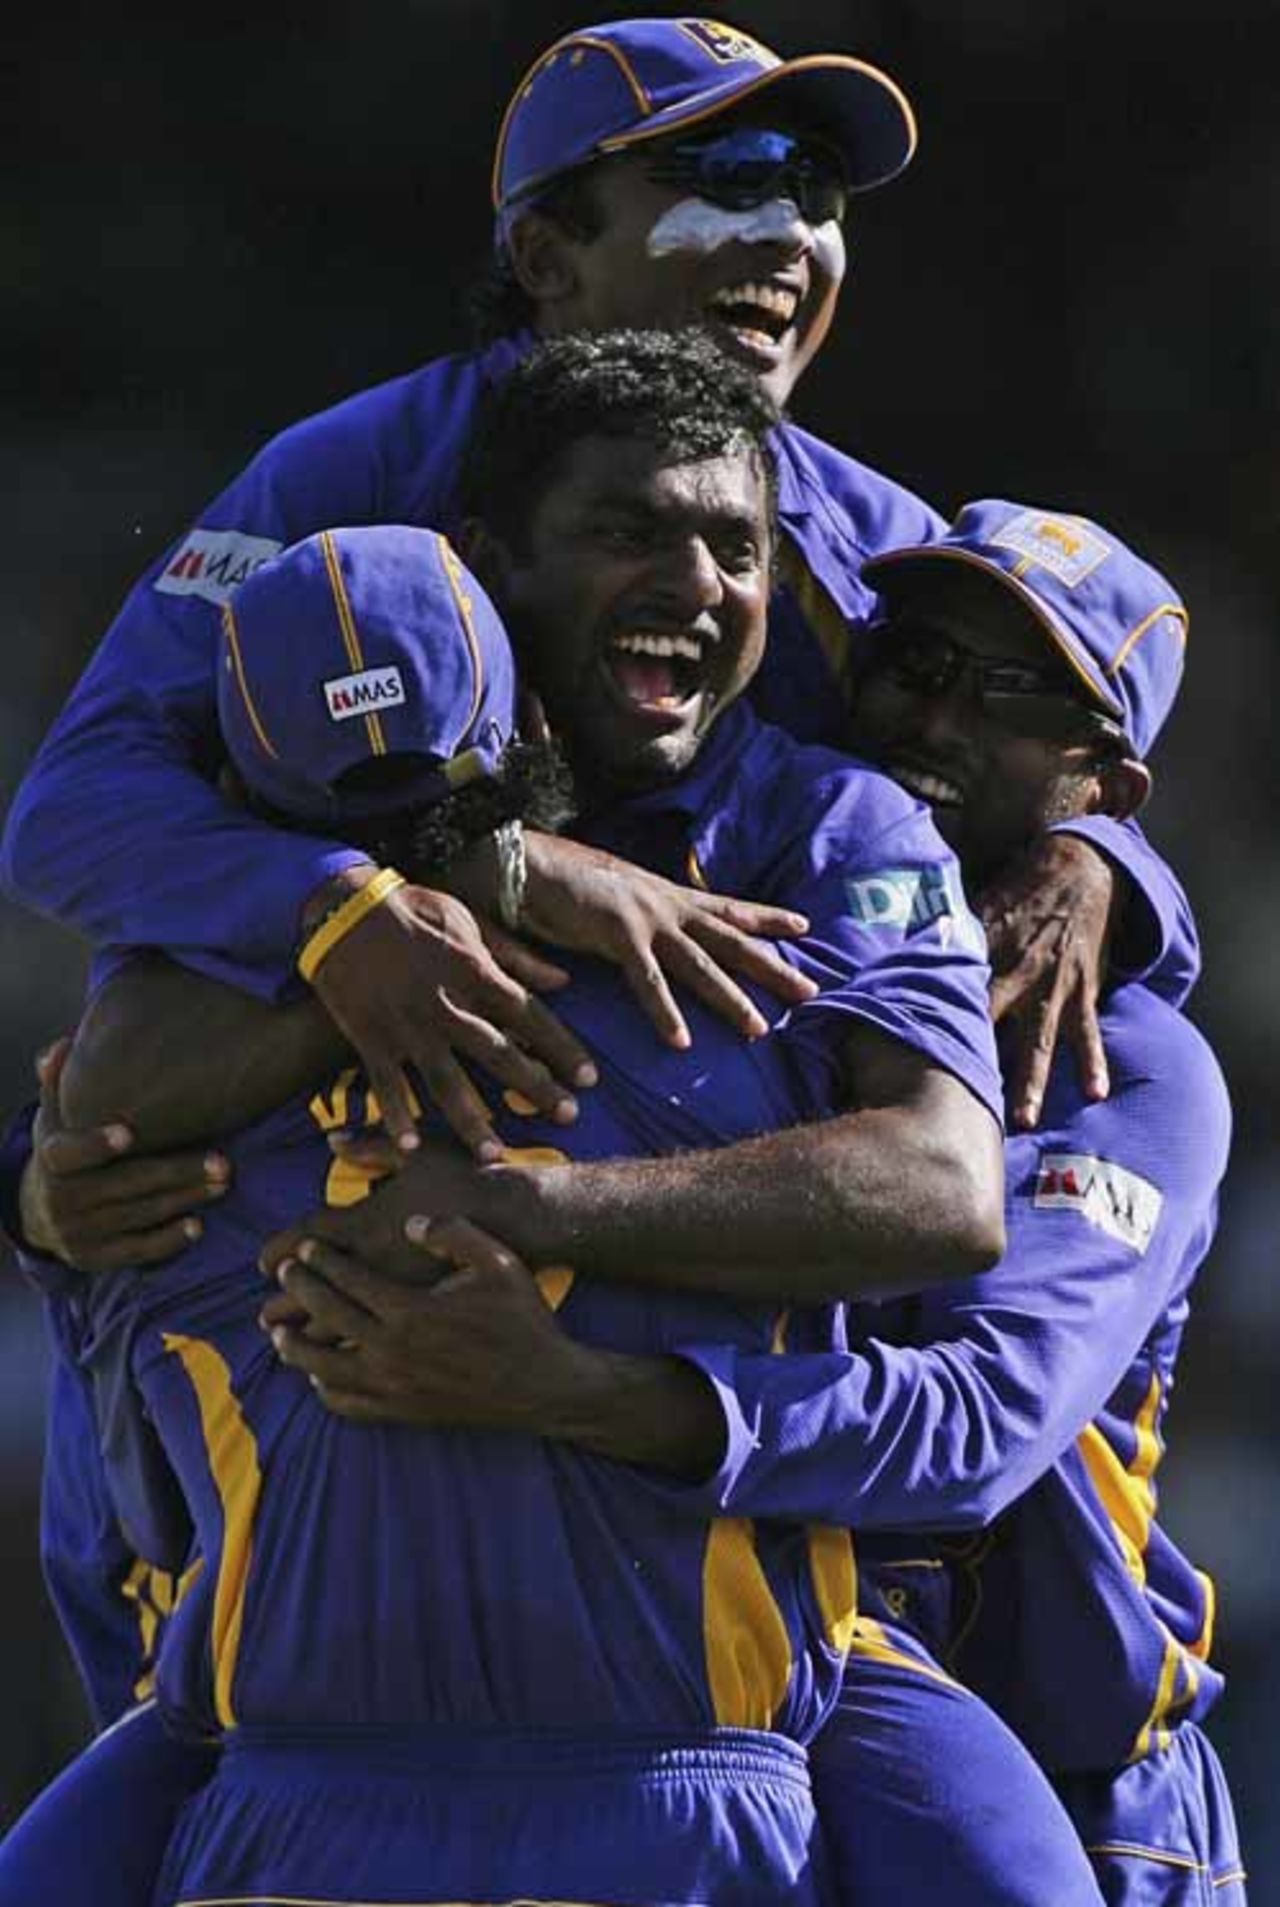 Muttiah Muralitharan is the center of attention after scalping Mahendra Singh Dhoni, India v Sri Lanka, Group B, Trinidad, March 23, 2007